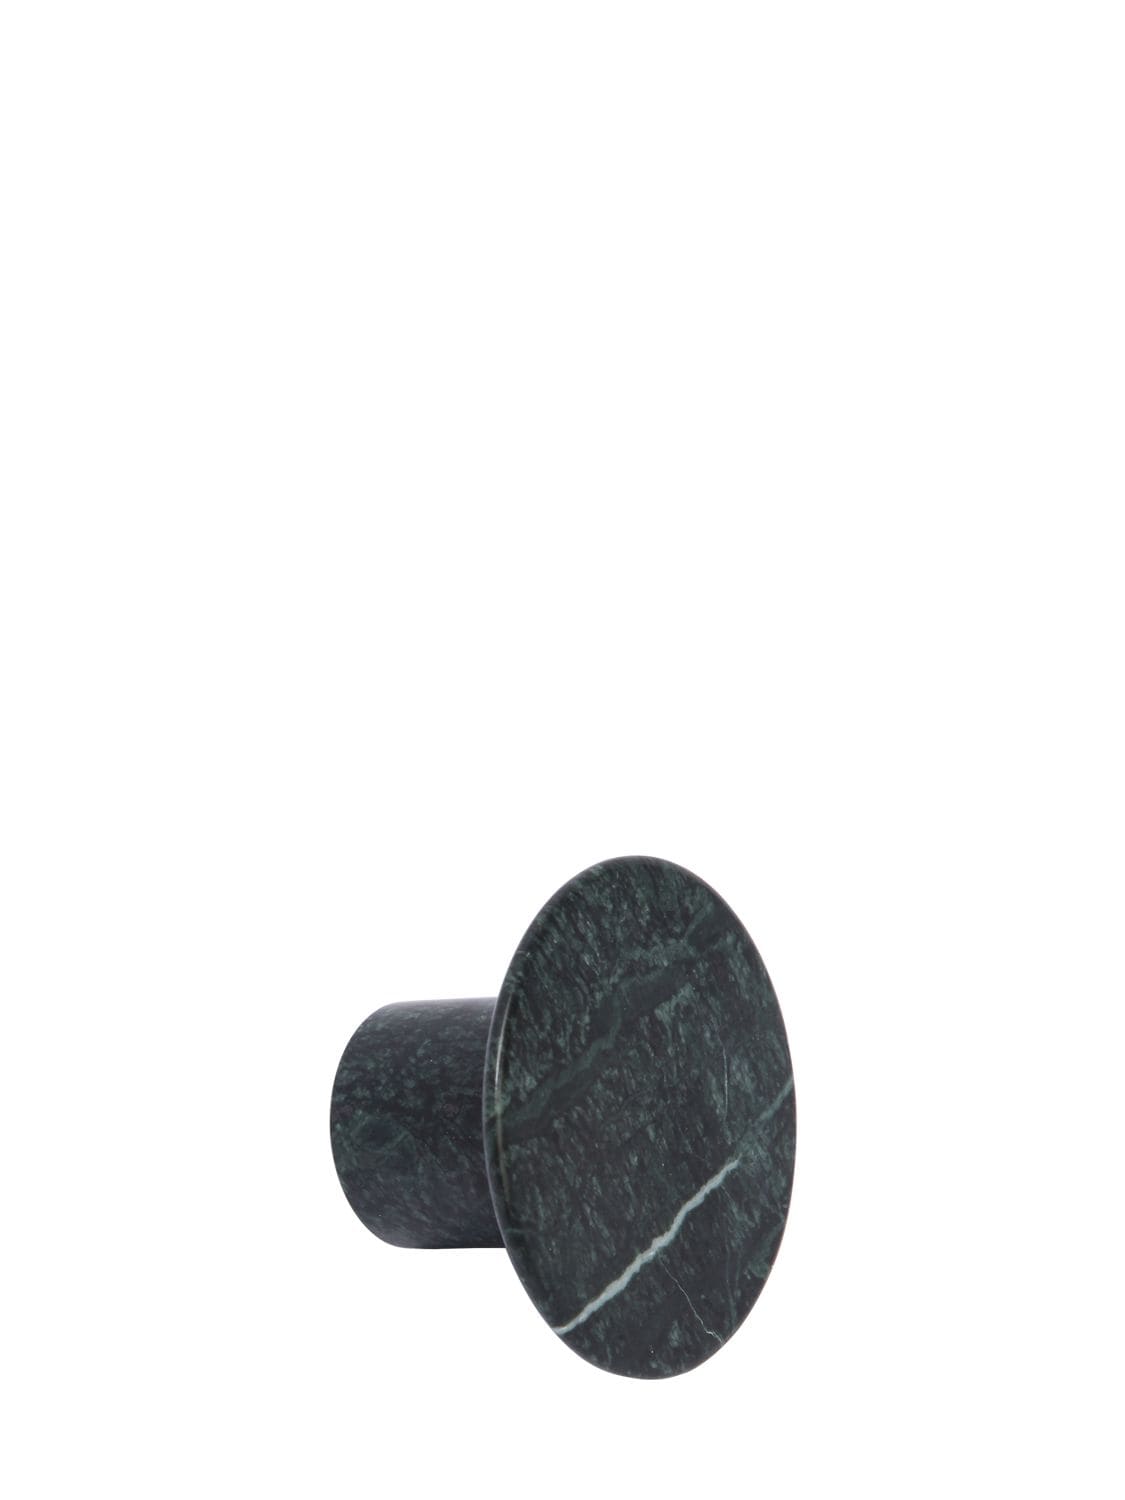 Small Verde Alpi Marble Wall Hook